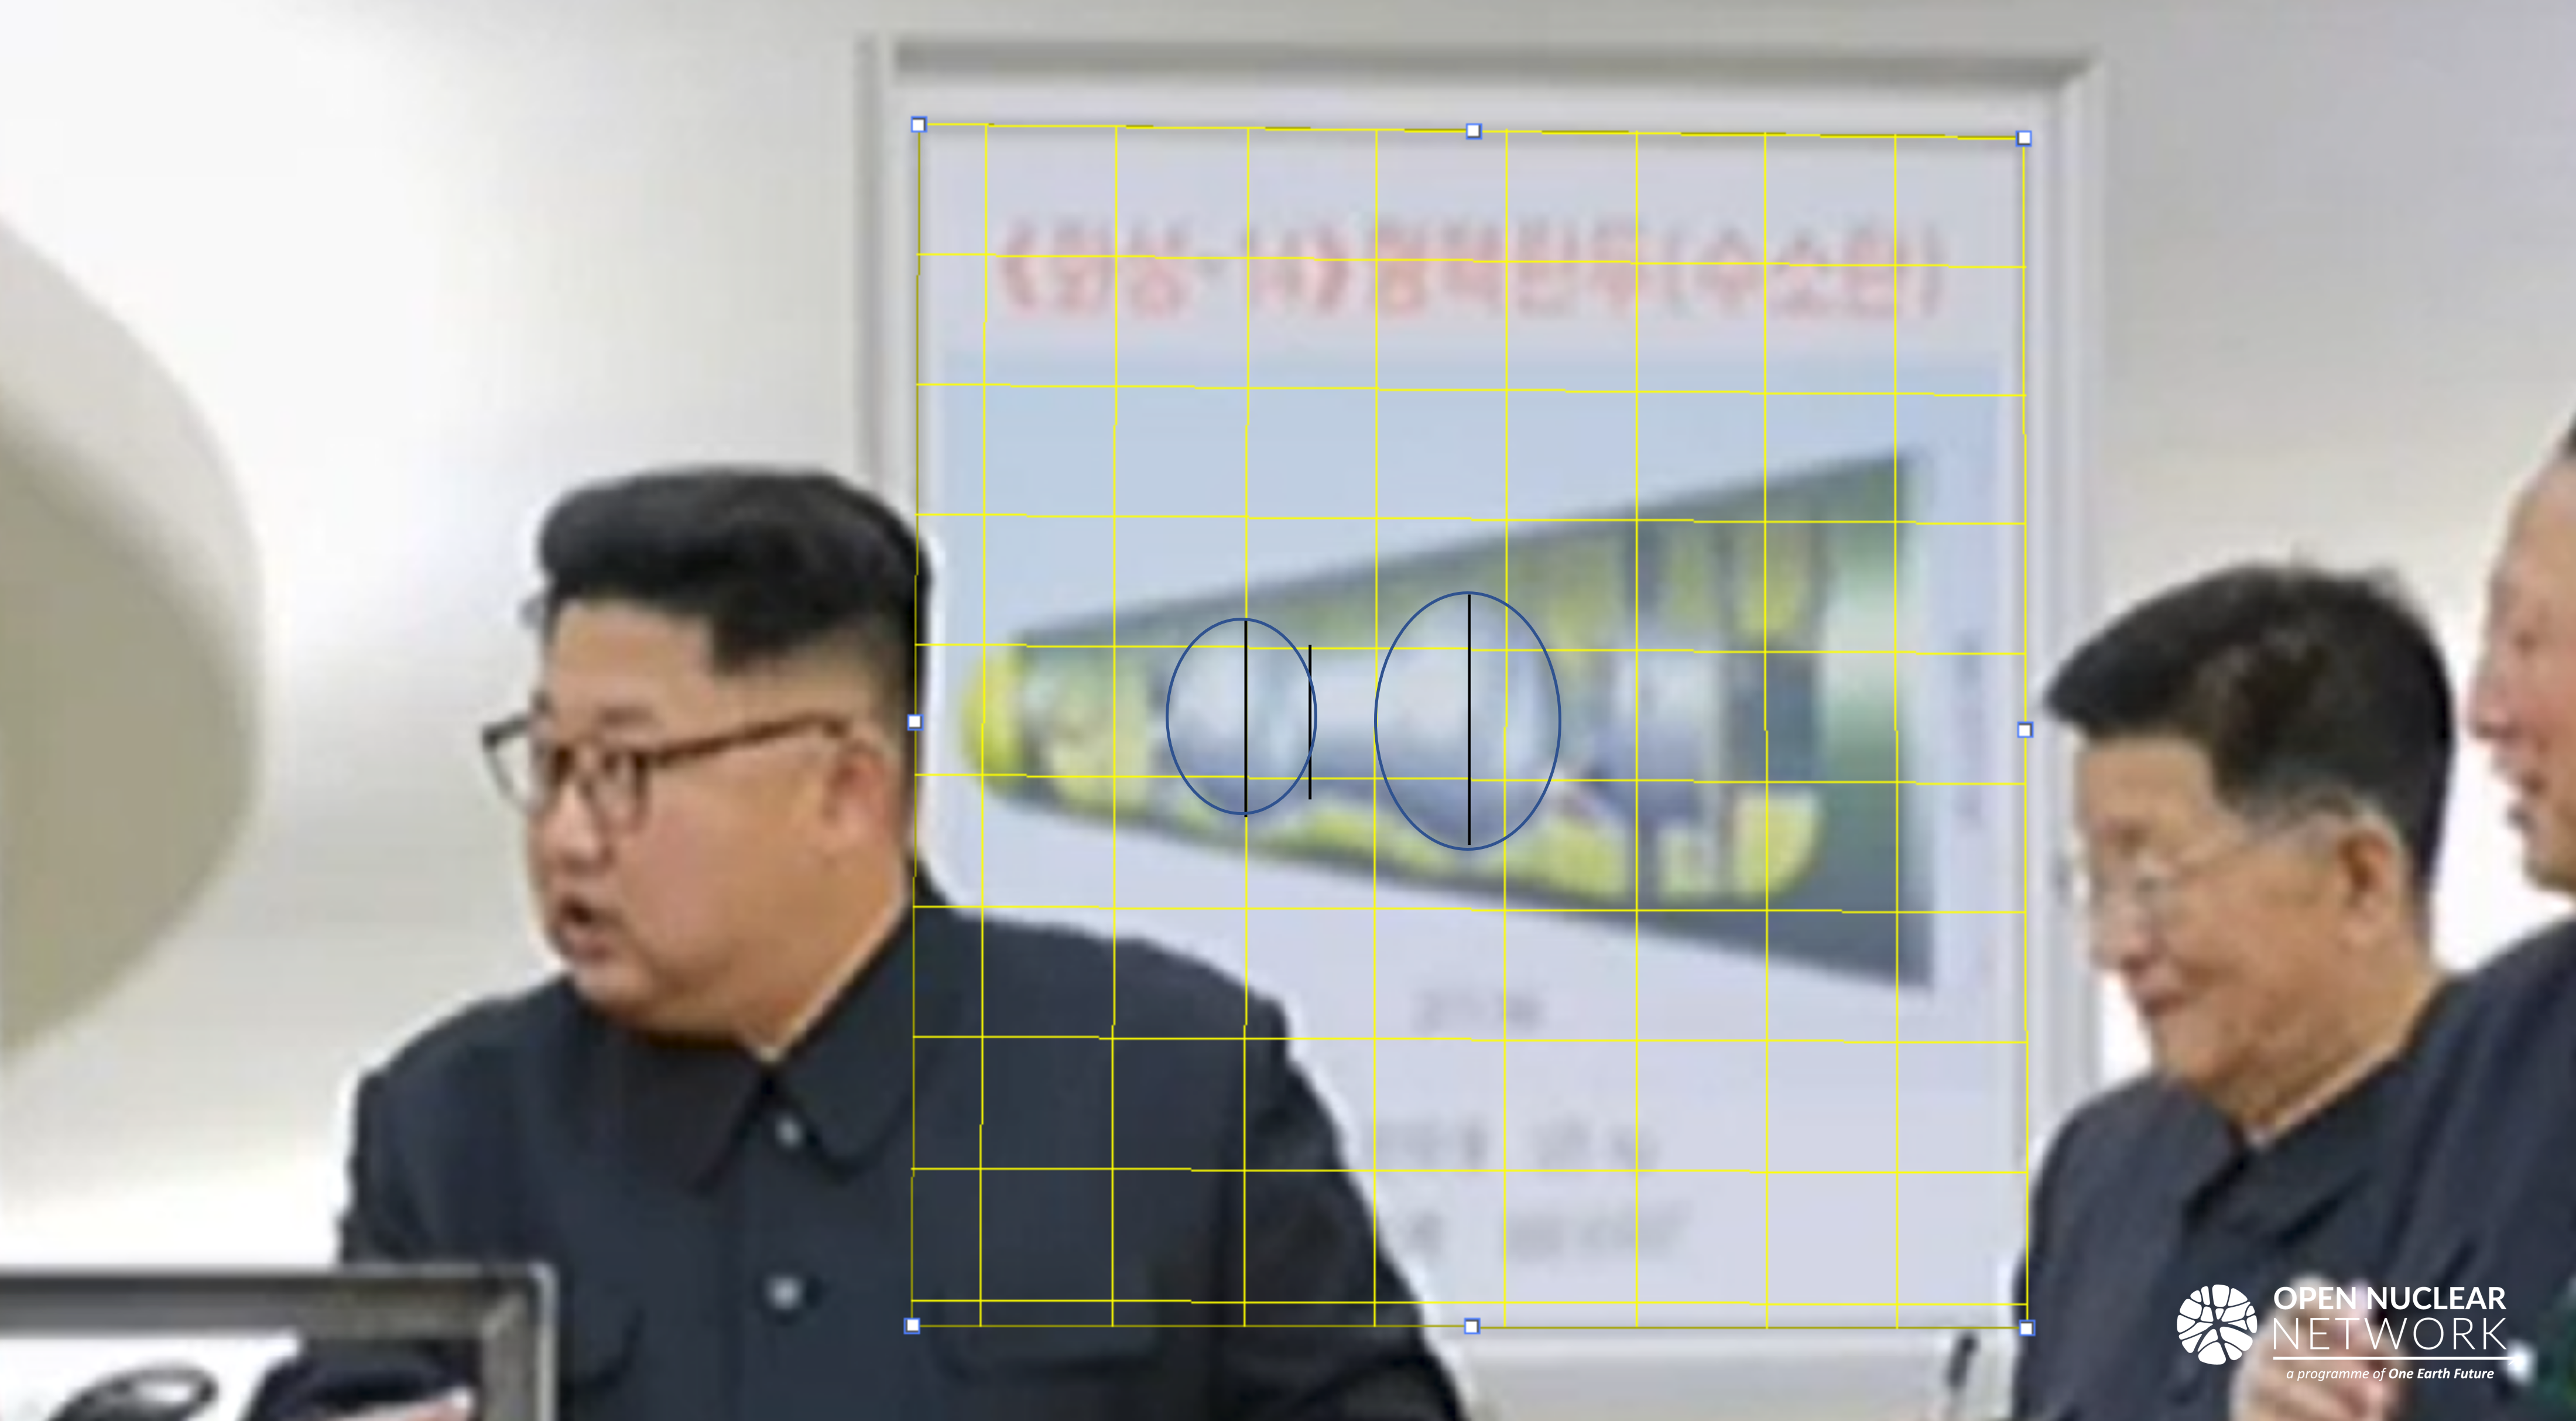 Figure 12. Diagram of re-entry vehicle shown to Kim Jong Un during his inspection. Image: KCTV 